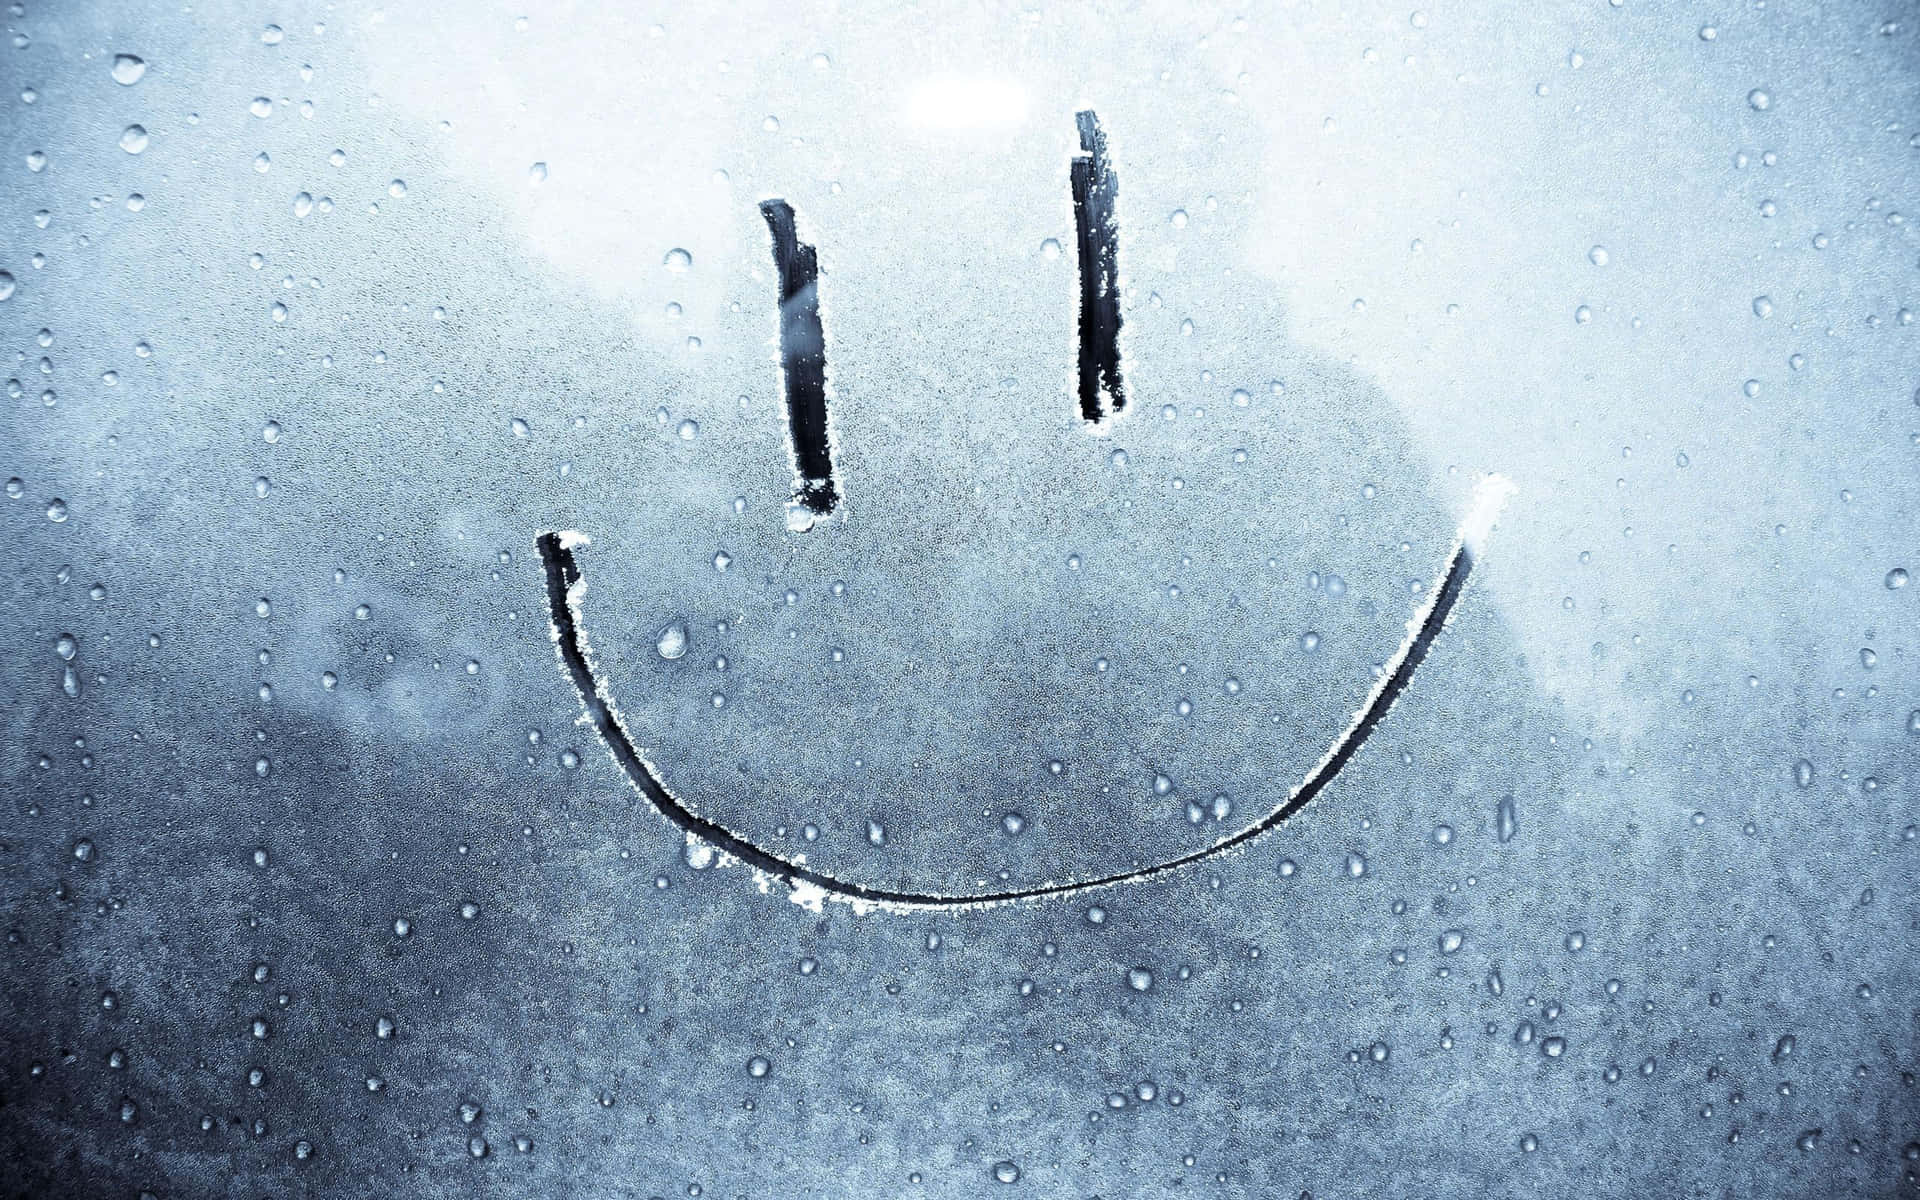 A Smiley Face Drawn On A Window